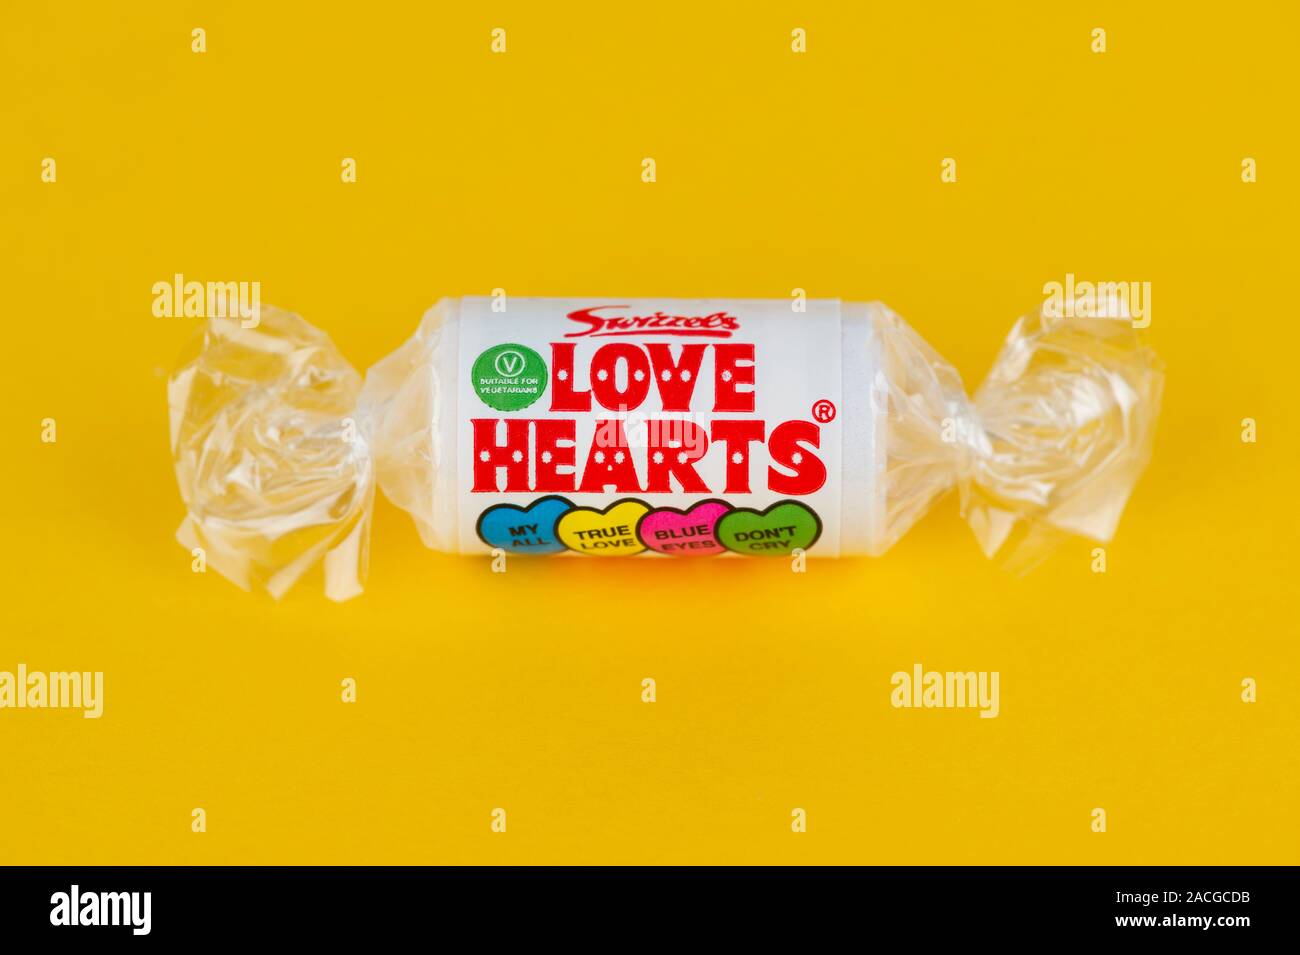 A packet of Swizzels Love Hearts shot on a yellow background. Stock Photo